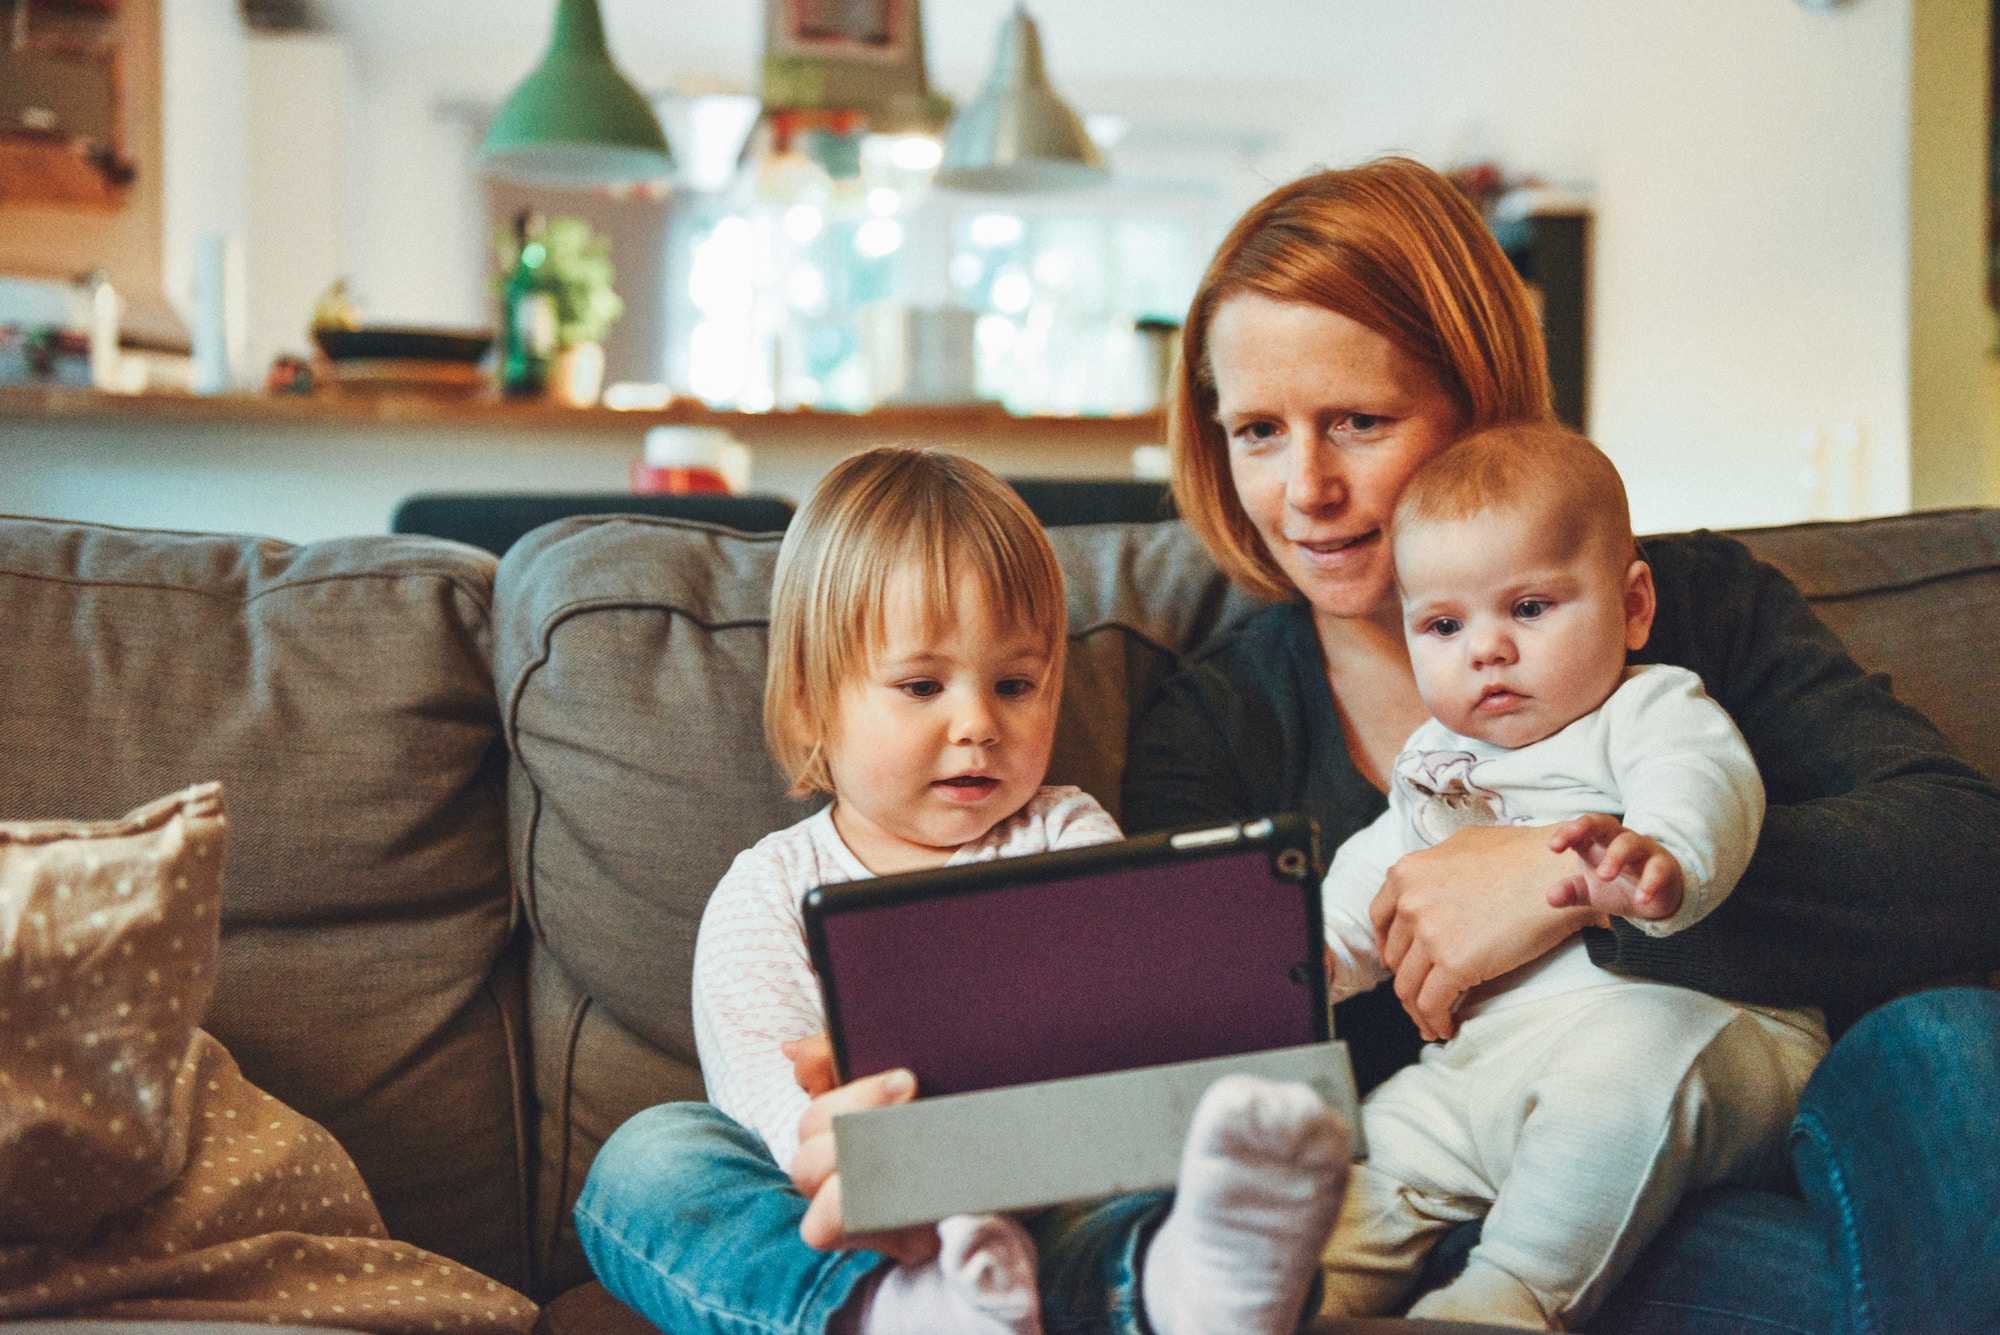 Red-headed woman sits on the couch holding her baby in her left arm while her older child sits to the right of her looking at an iPad